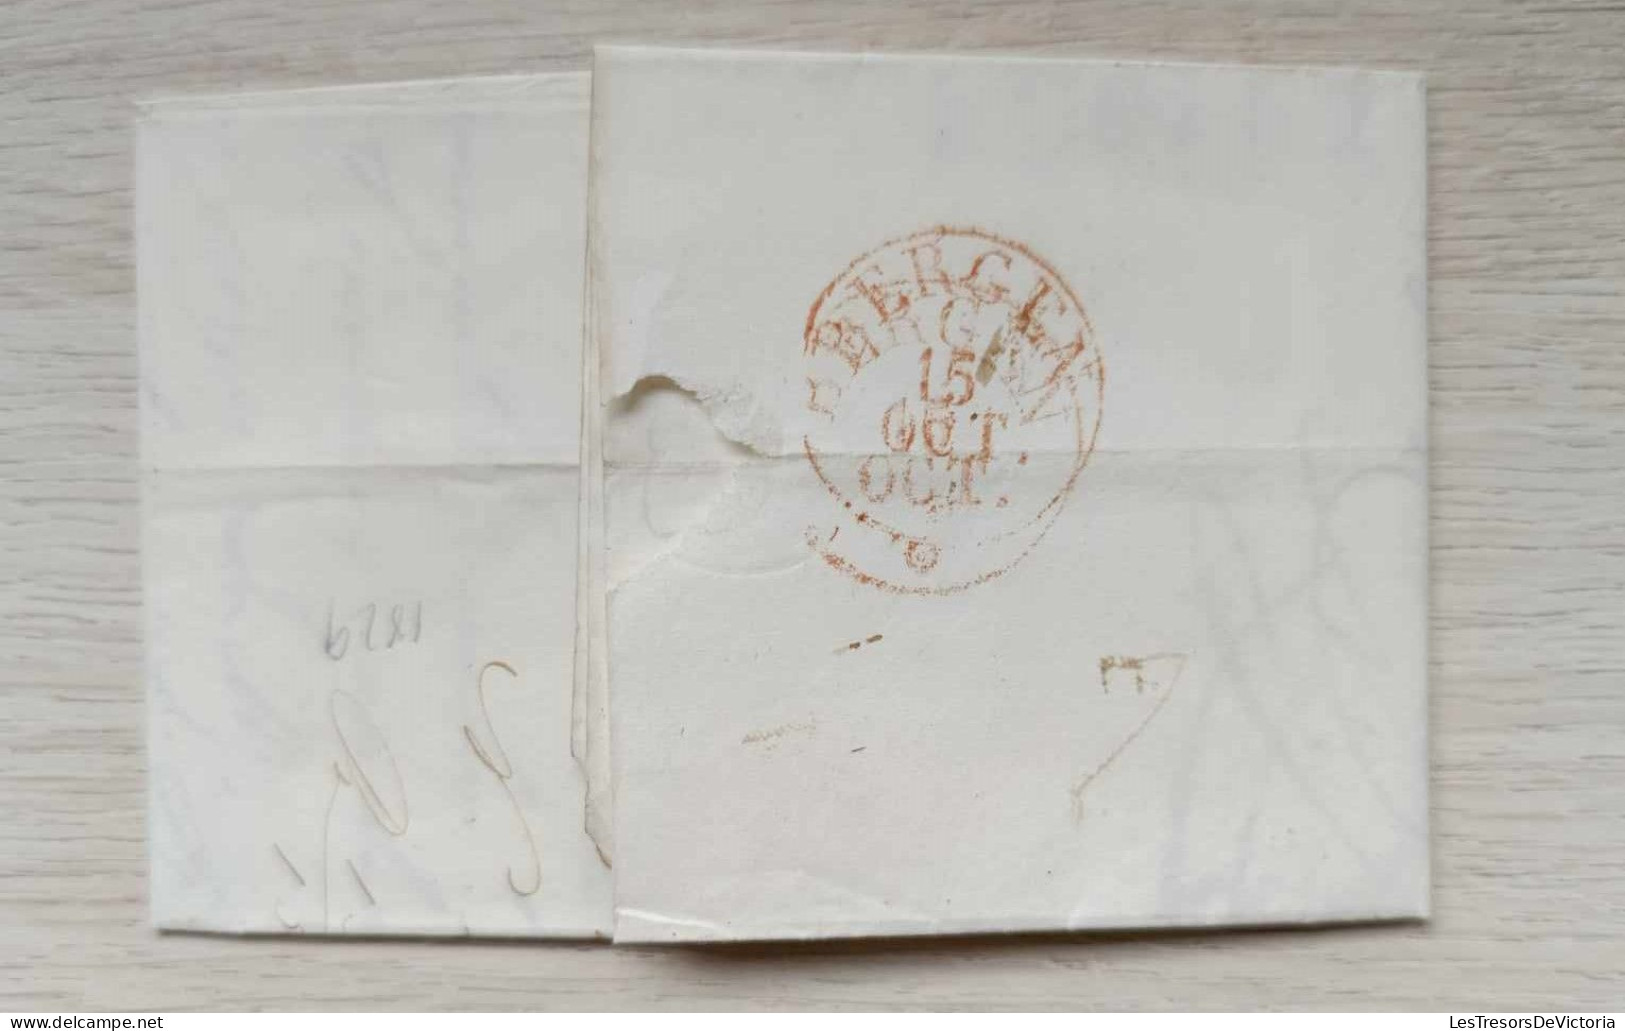 Letter Mailed On October 13th 1829 From Gent To Hornu  - Weight Indication "16" Wigtjes - 1815-1830 (Periodo Holandes)